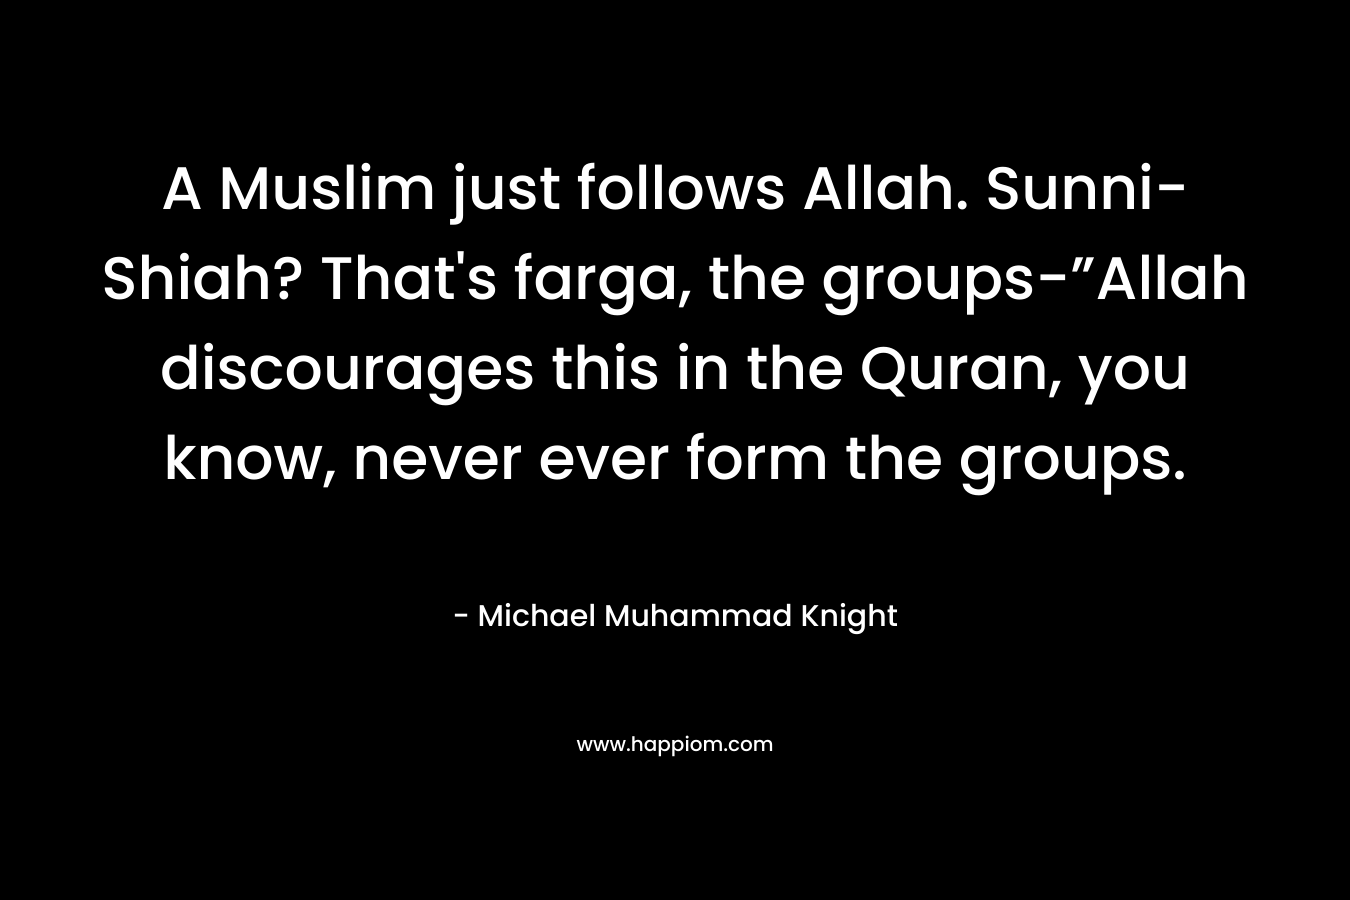 A Muslim just follows Allah. Sunni-Shiah? That’s farga, the groups-”Allah discourages this in the Quran, you know, never ever form the groups. – Michael Muhammad Knight